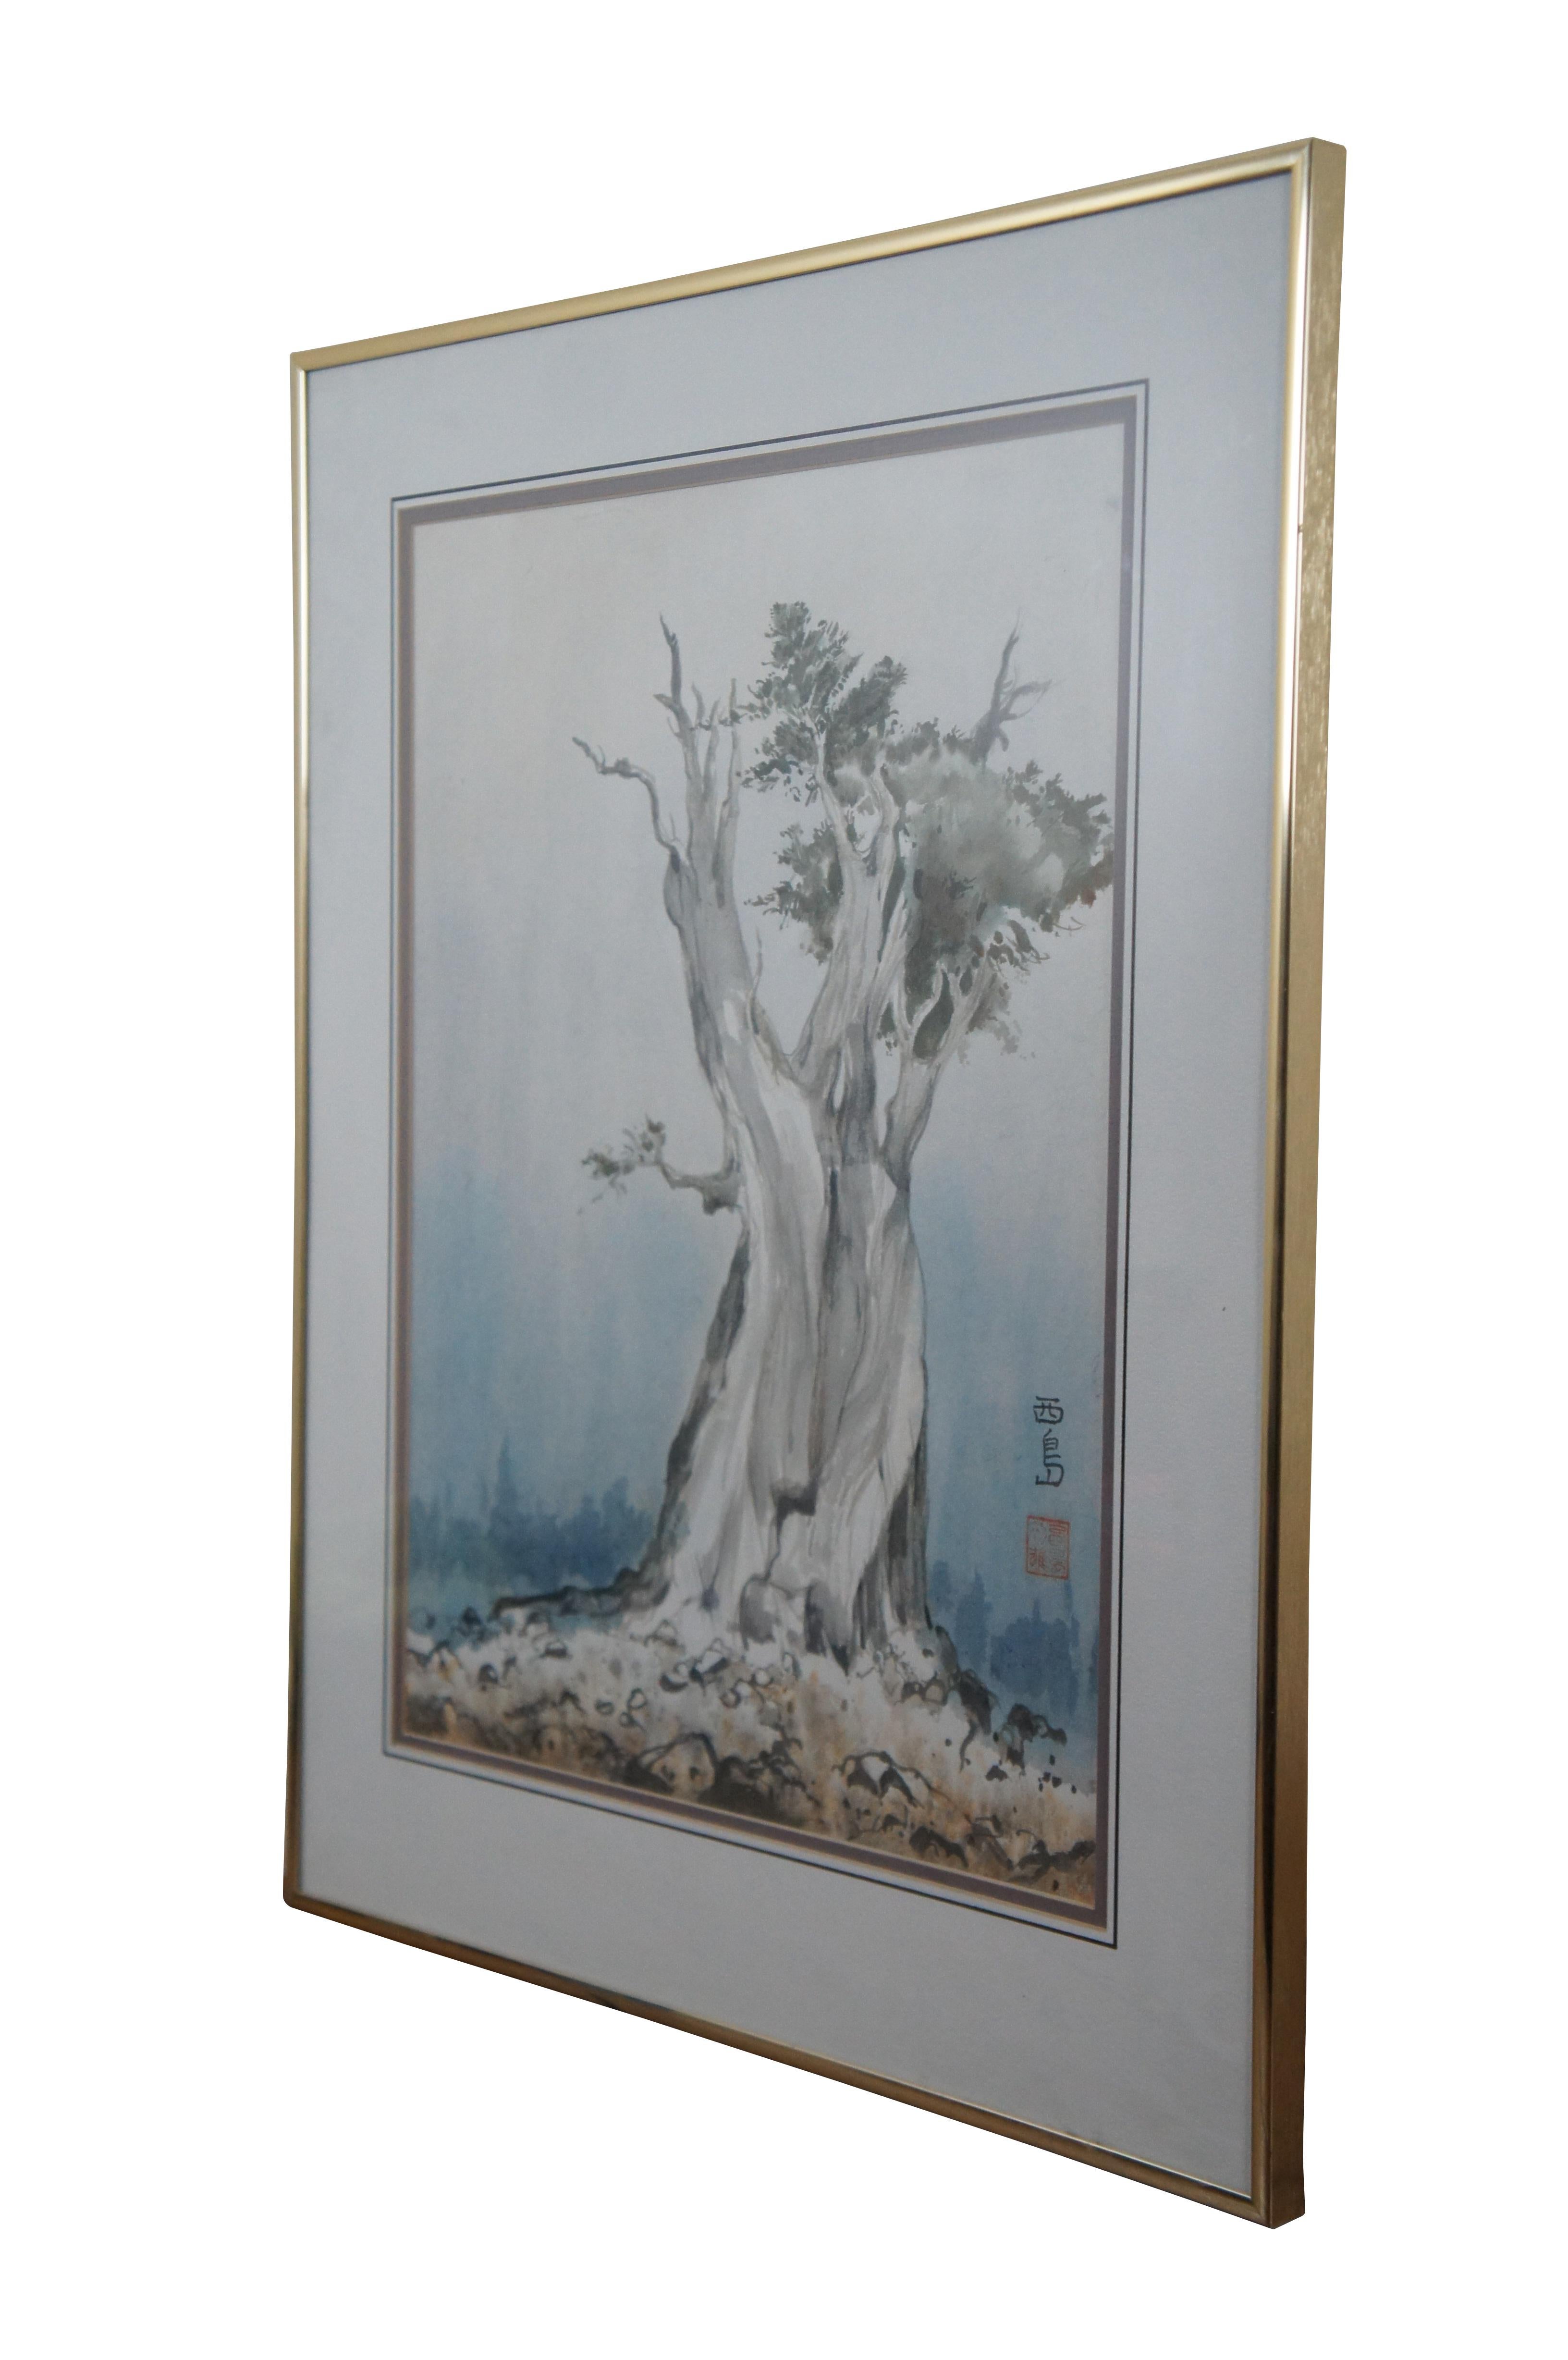 Vintage Japanese watercolor painting on paper depicting a somewhat barren pine tree with a thick trunk in rocky soil. Signed/stamped on right side. Framed in metallic gold frame. Signature translates to Nishijima

Dimensions:
21.25